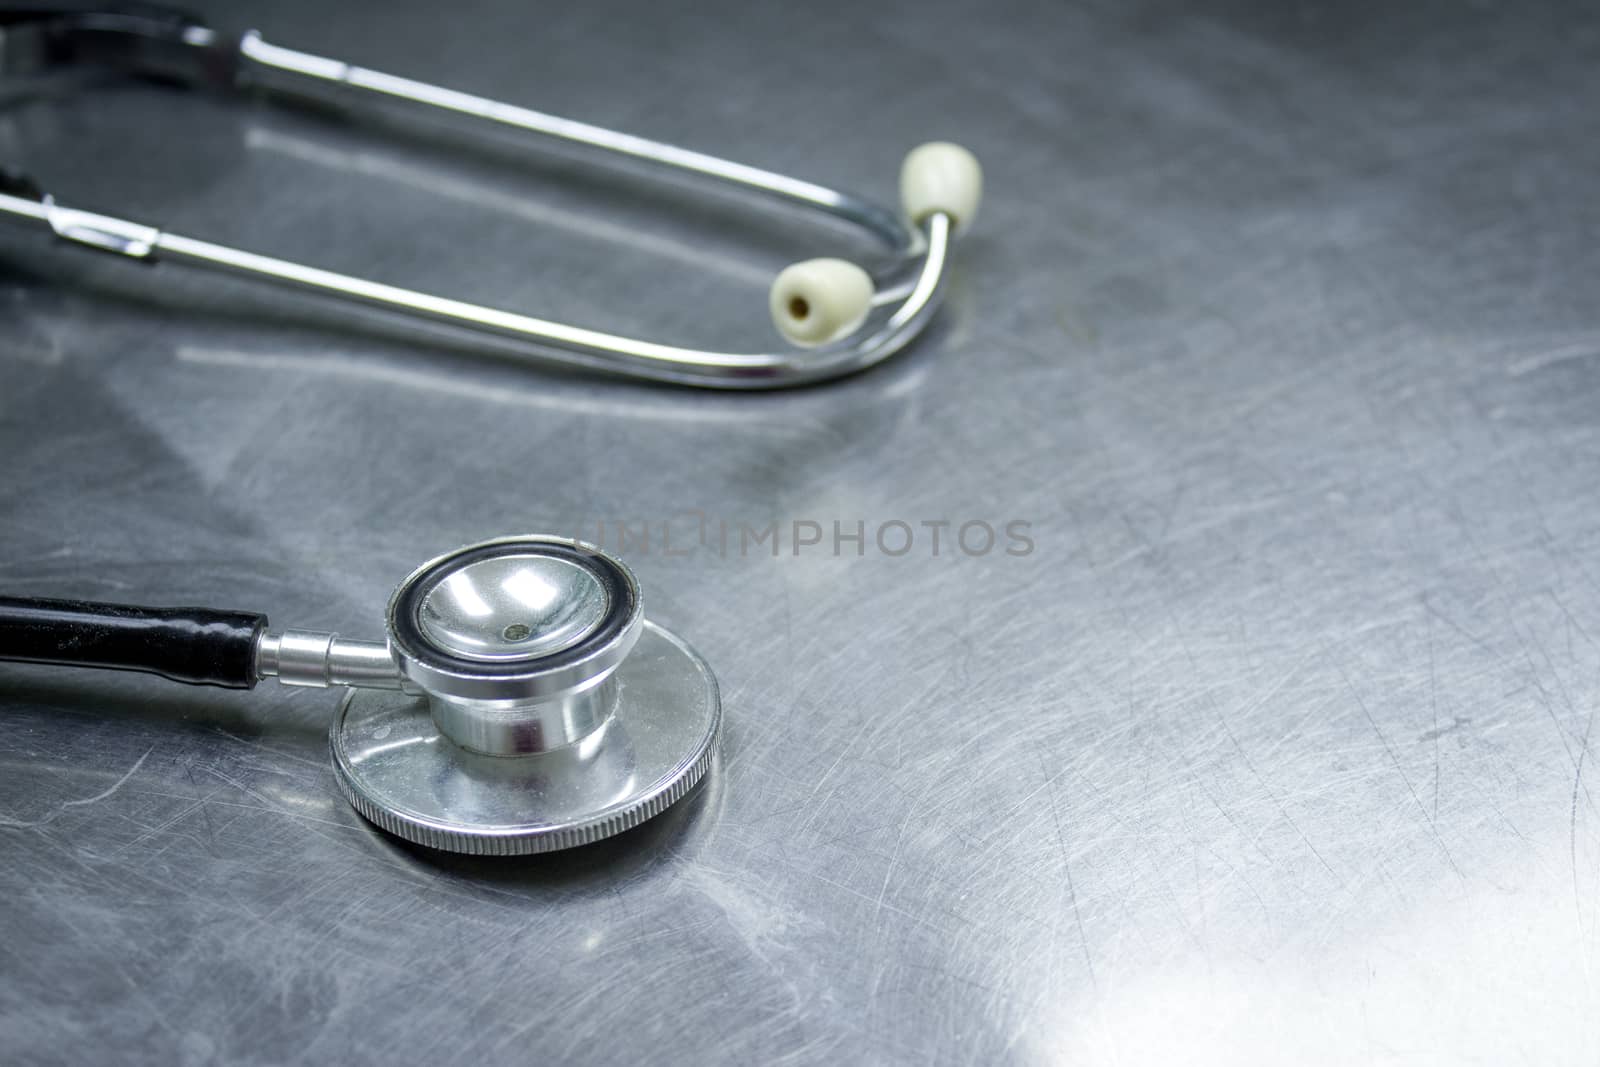 Stethoscope in the doctors office by GemaIbarra